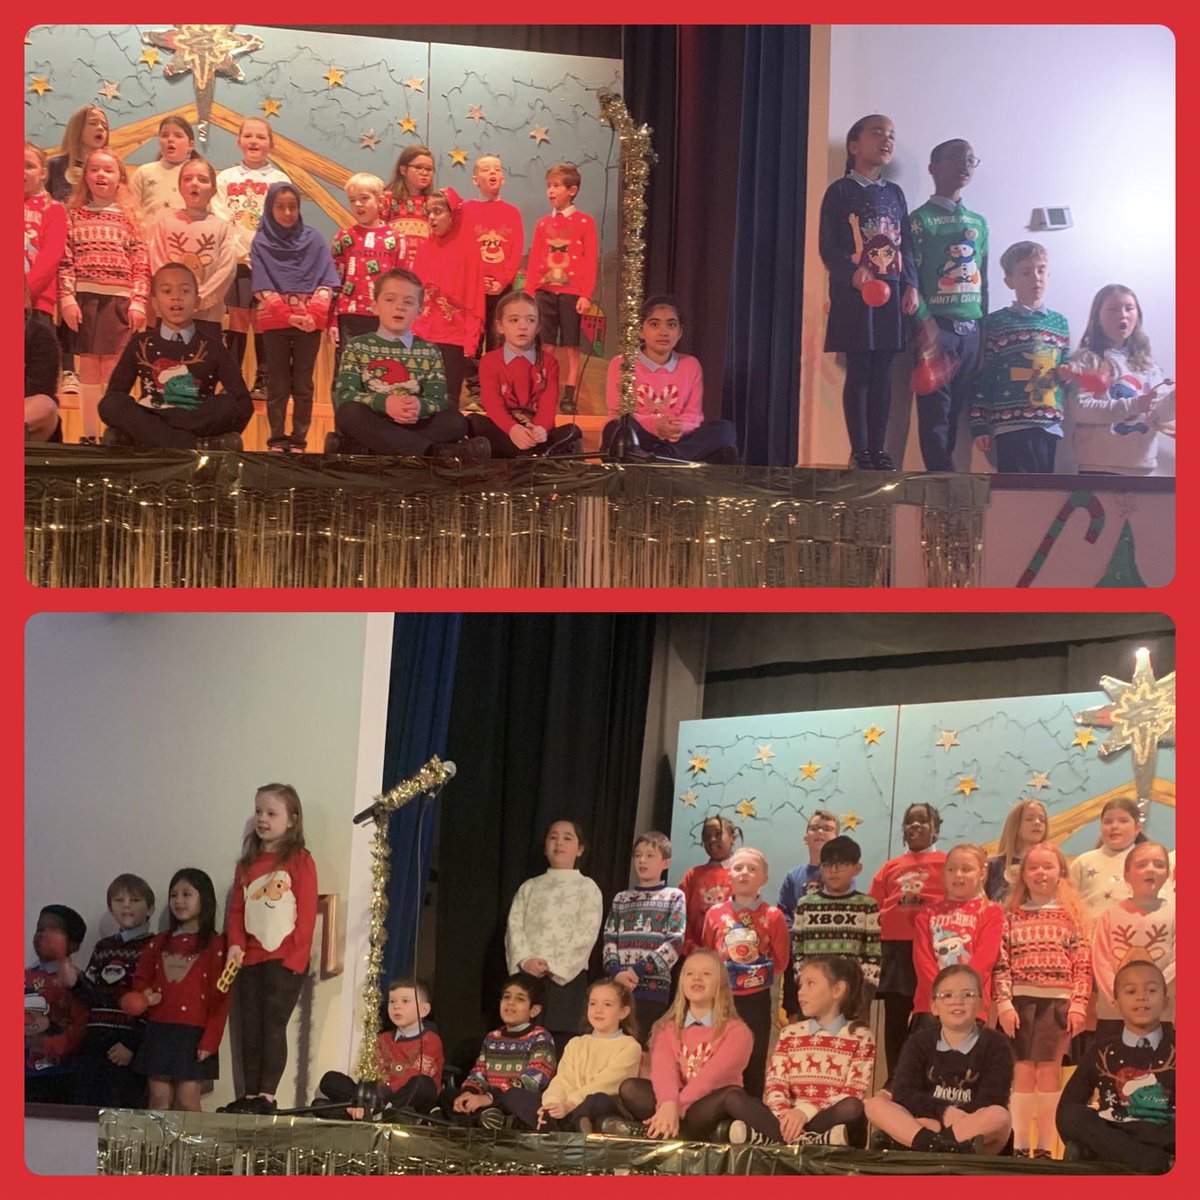 Well done to our Primary 4 to Primary 7 who were amazing today getting us all in the mood for Christmas. We are so proud of you all 🎤 🎶 🎵 #christmasconcert